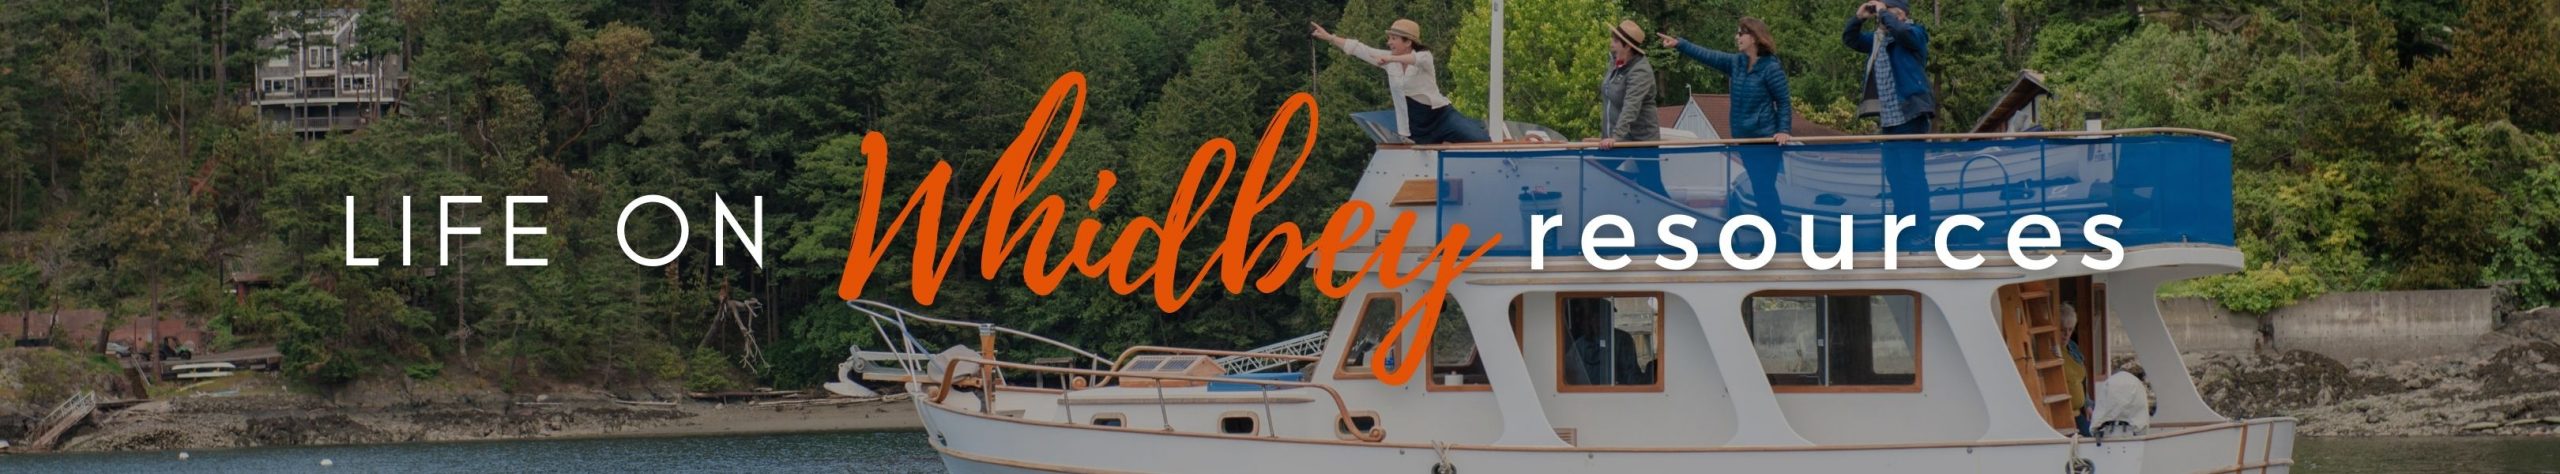 life on Whidbey, Whidbey Island, Real Estate, Real Estate Whidbey Island, Community, Collaboration, together, Lifestyle